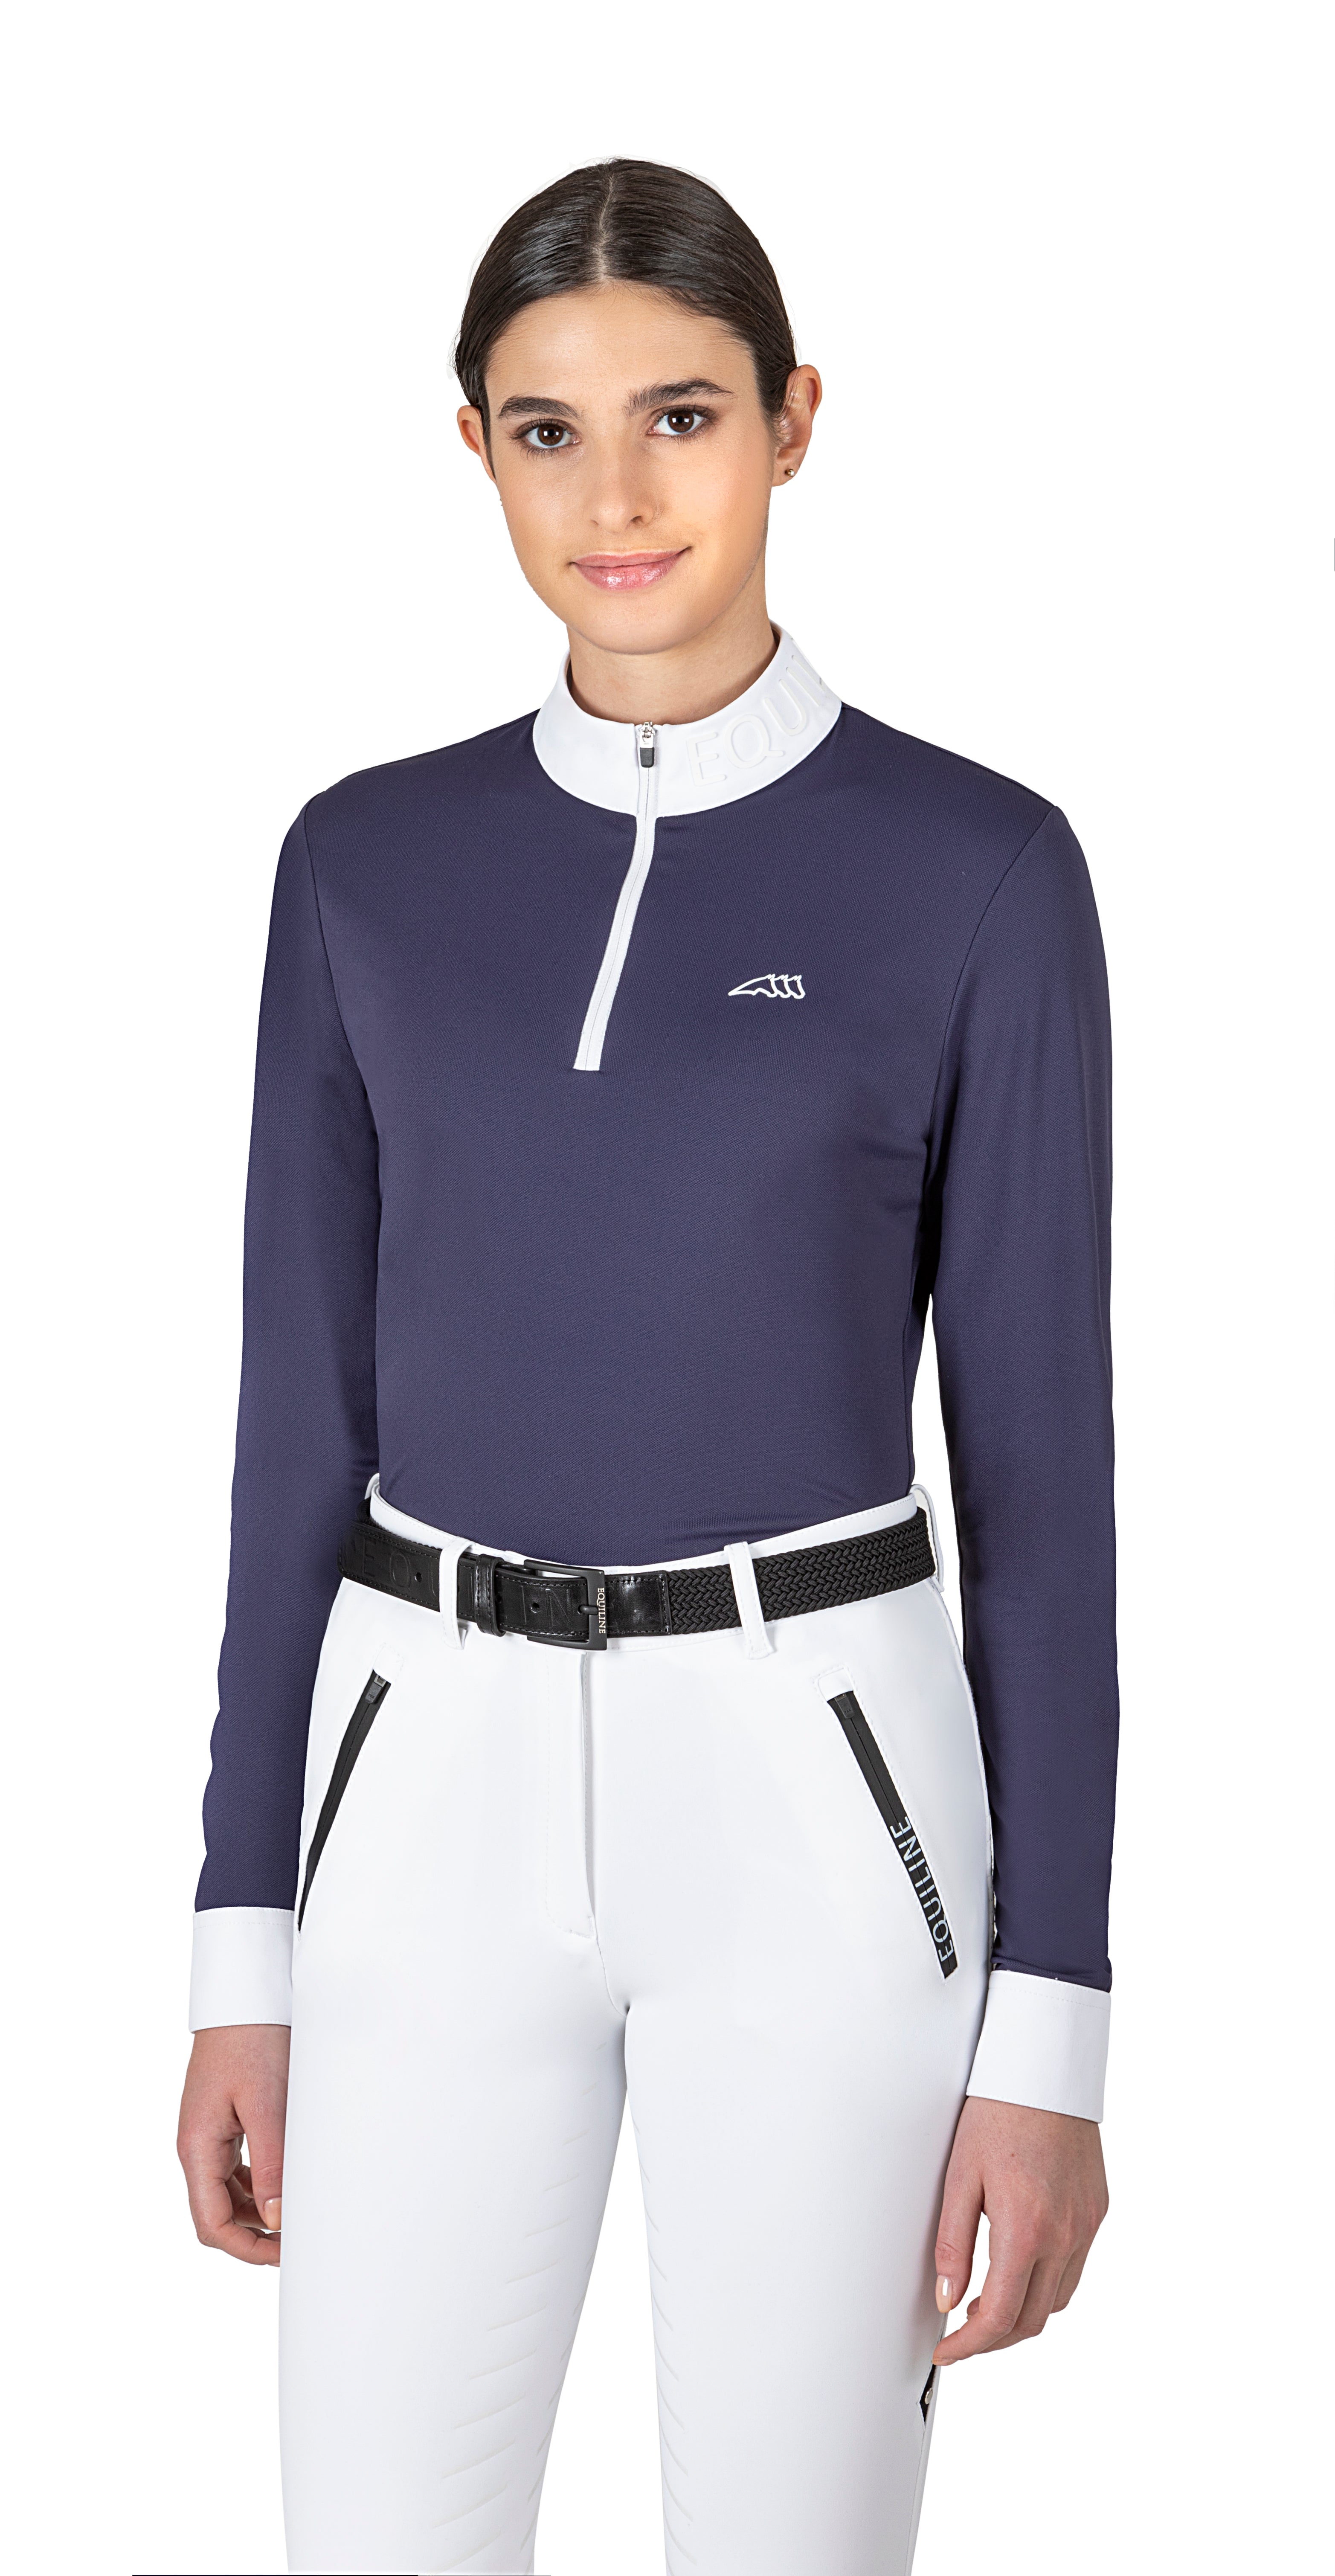 Equiline - Casec Women's Competition Polo Shirt